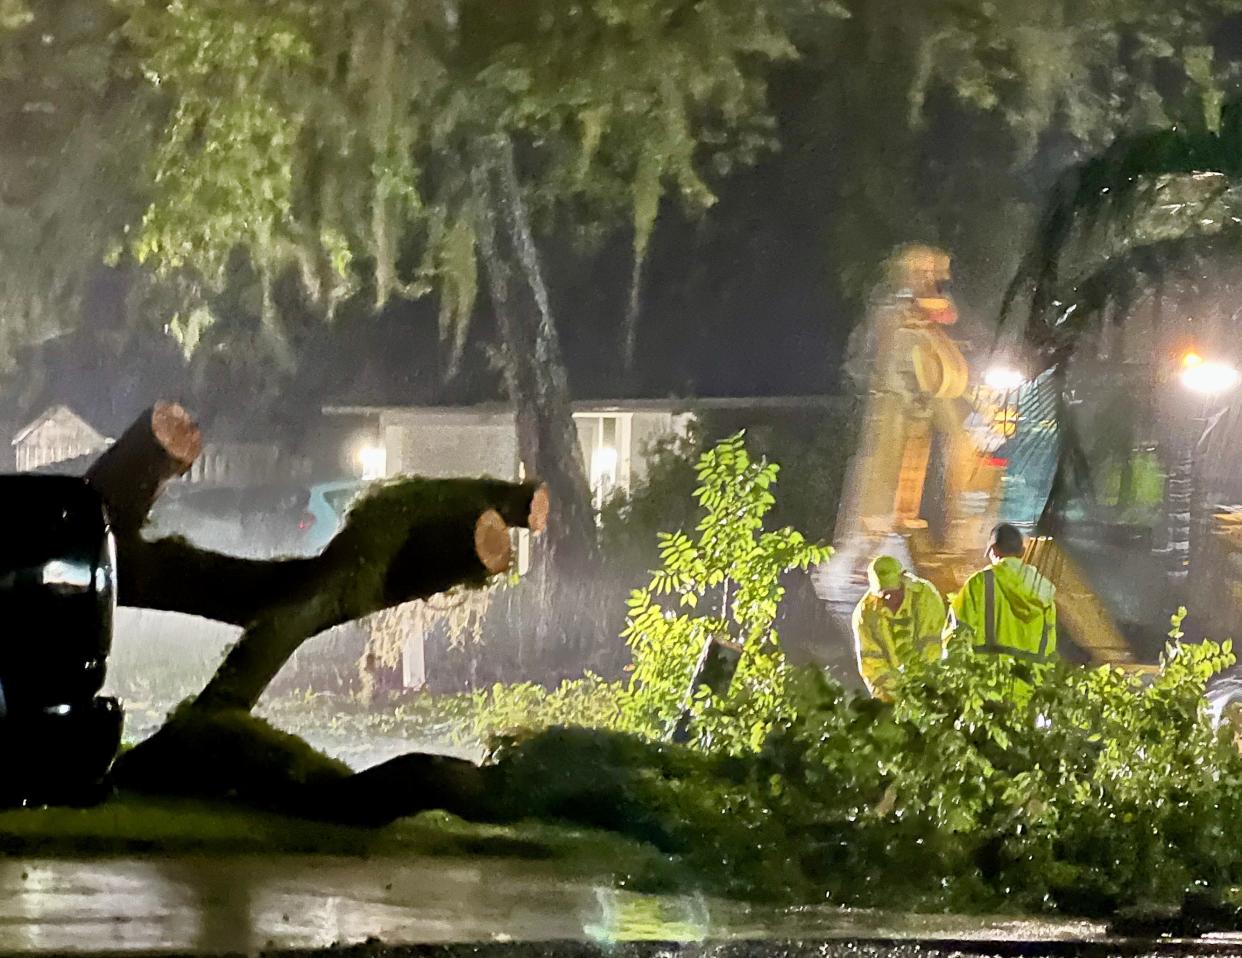 Crews from Holly Hill worked to clean up debris from a fallen tree as wind and rain from Tropical Storm Ian pounded Volusia County on Sept. 29.